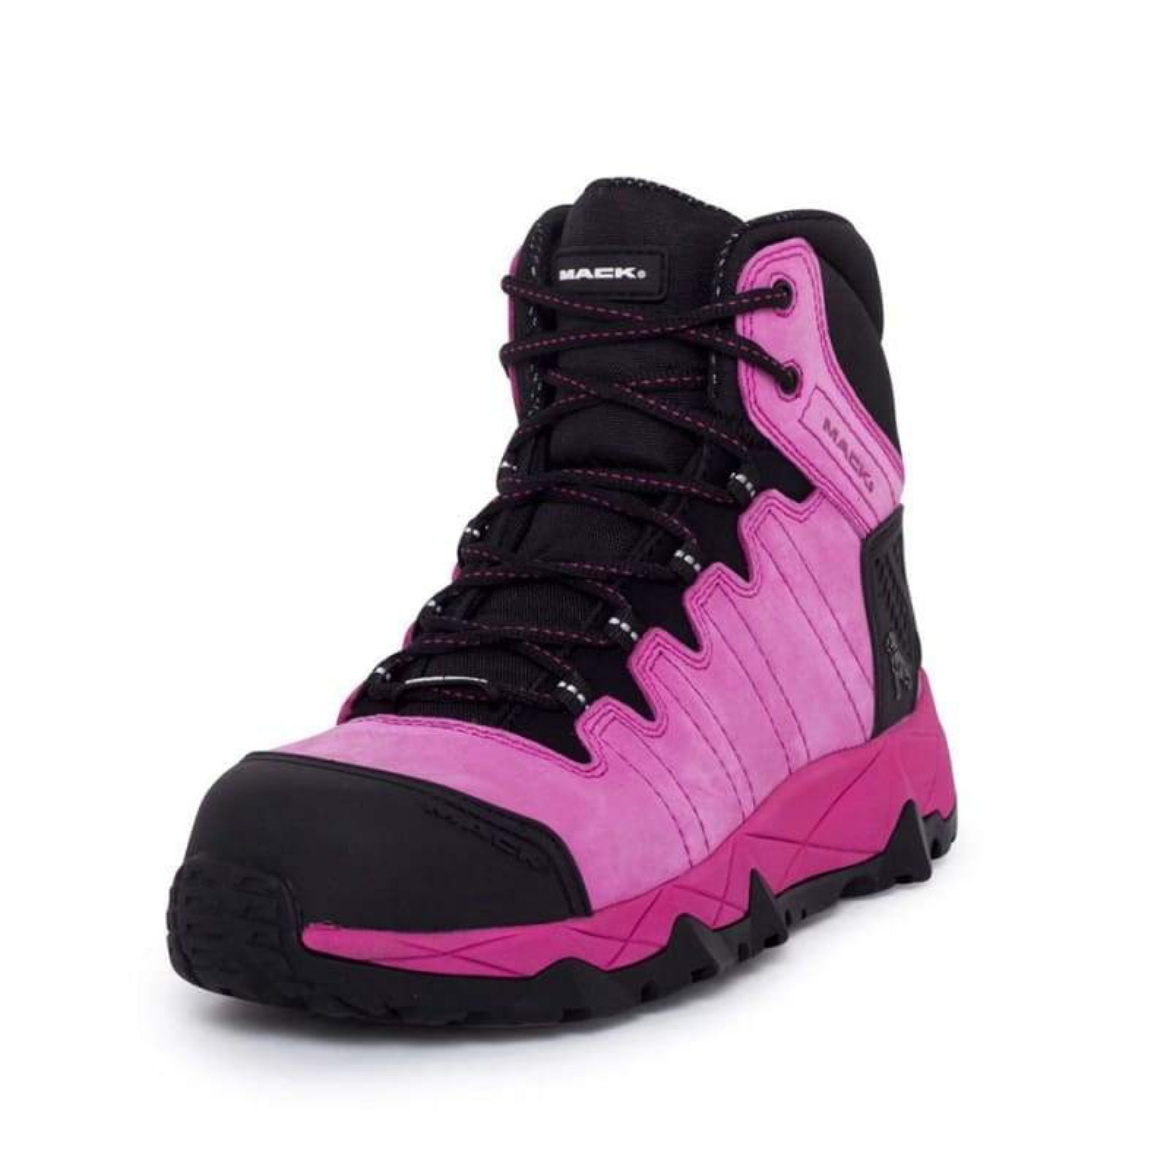 Picture of Mack, McGrath 2, Womens, Safety Boot, Lace-Up